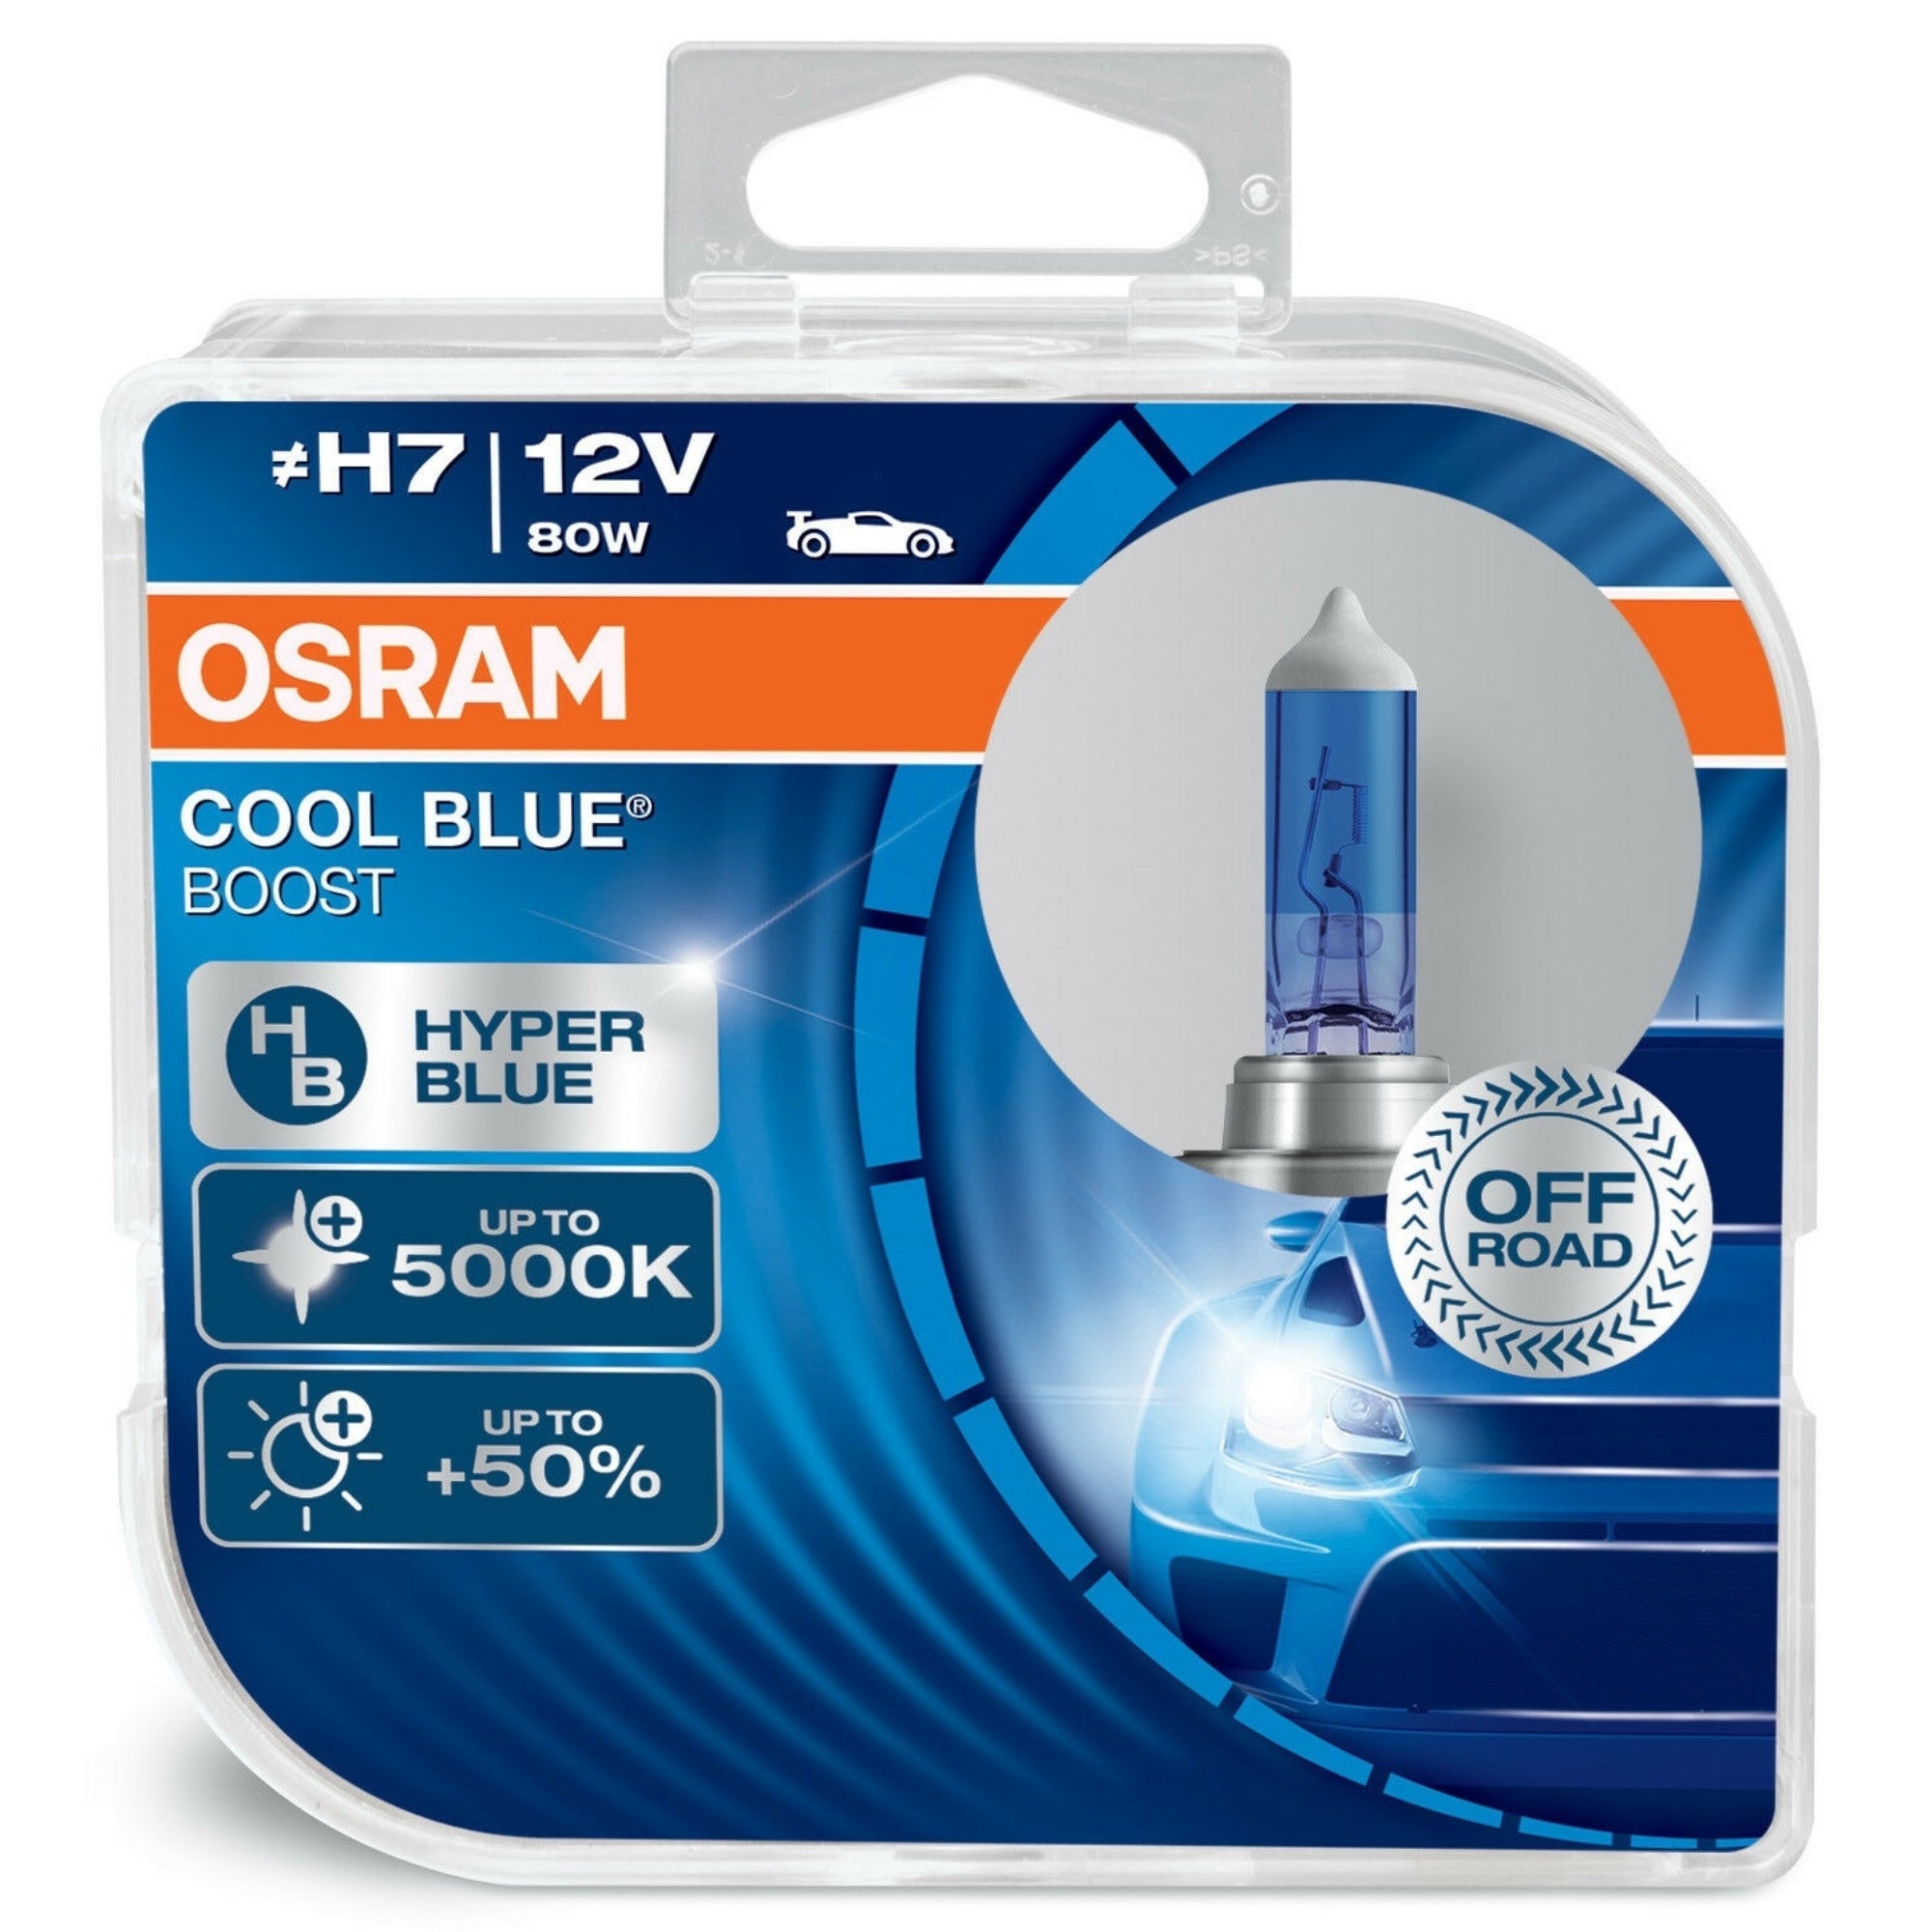 OSRAM H7 12V 80W Cool Blue Boost Twin Pack